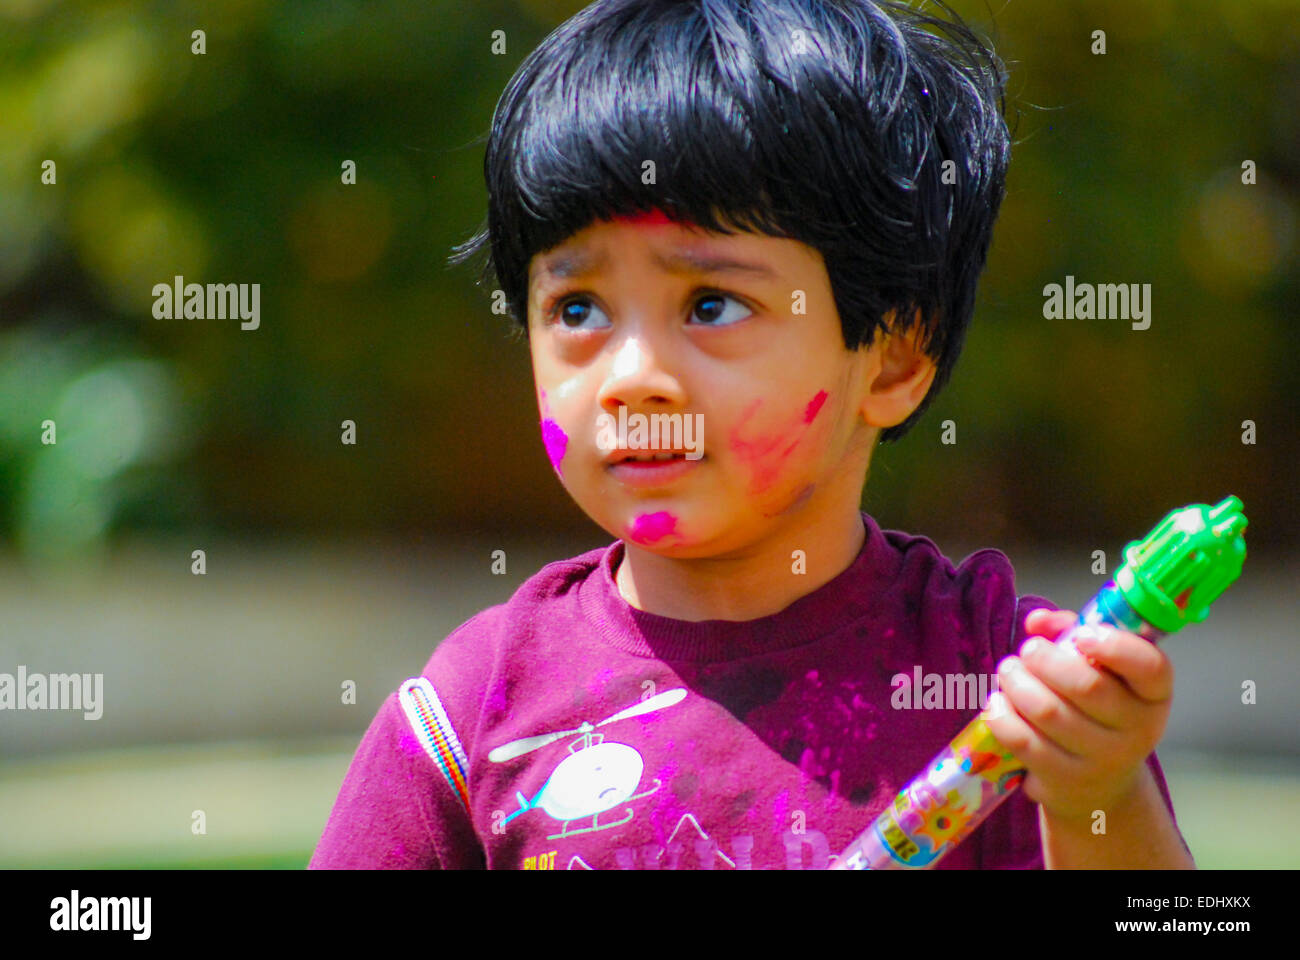 An Indian kid playing with powder colors & water during the spring hindu festival Holi also known as a festival of colors. Stock Photo